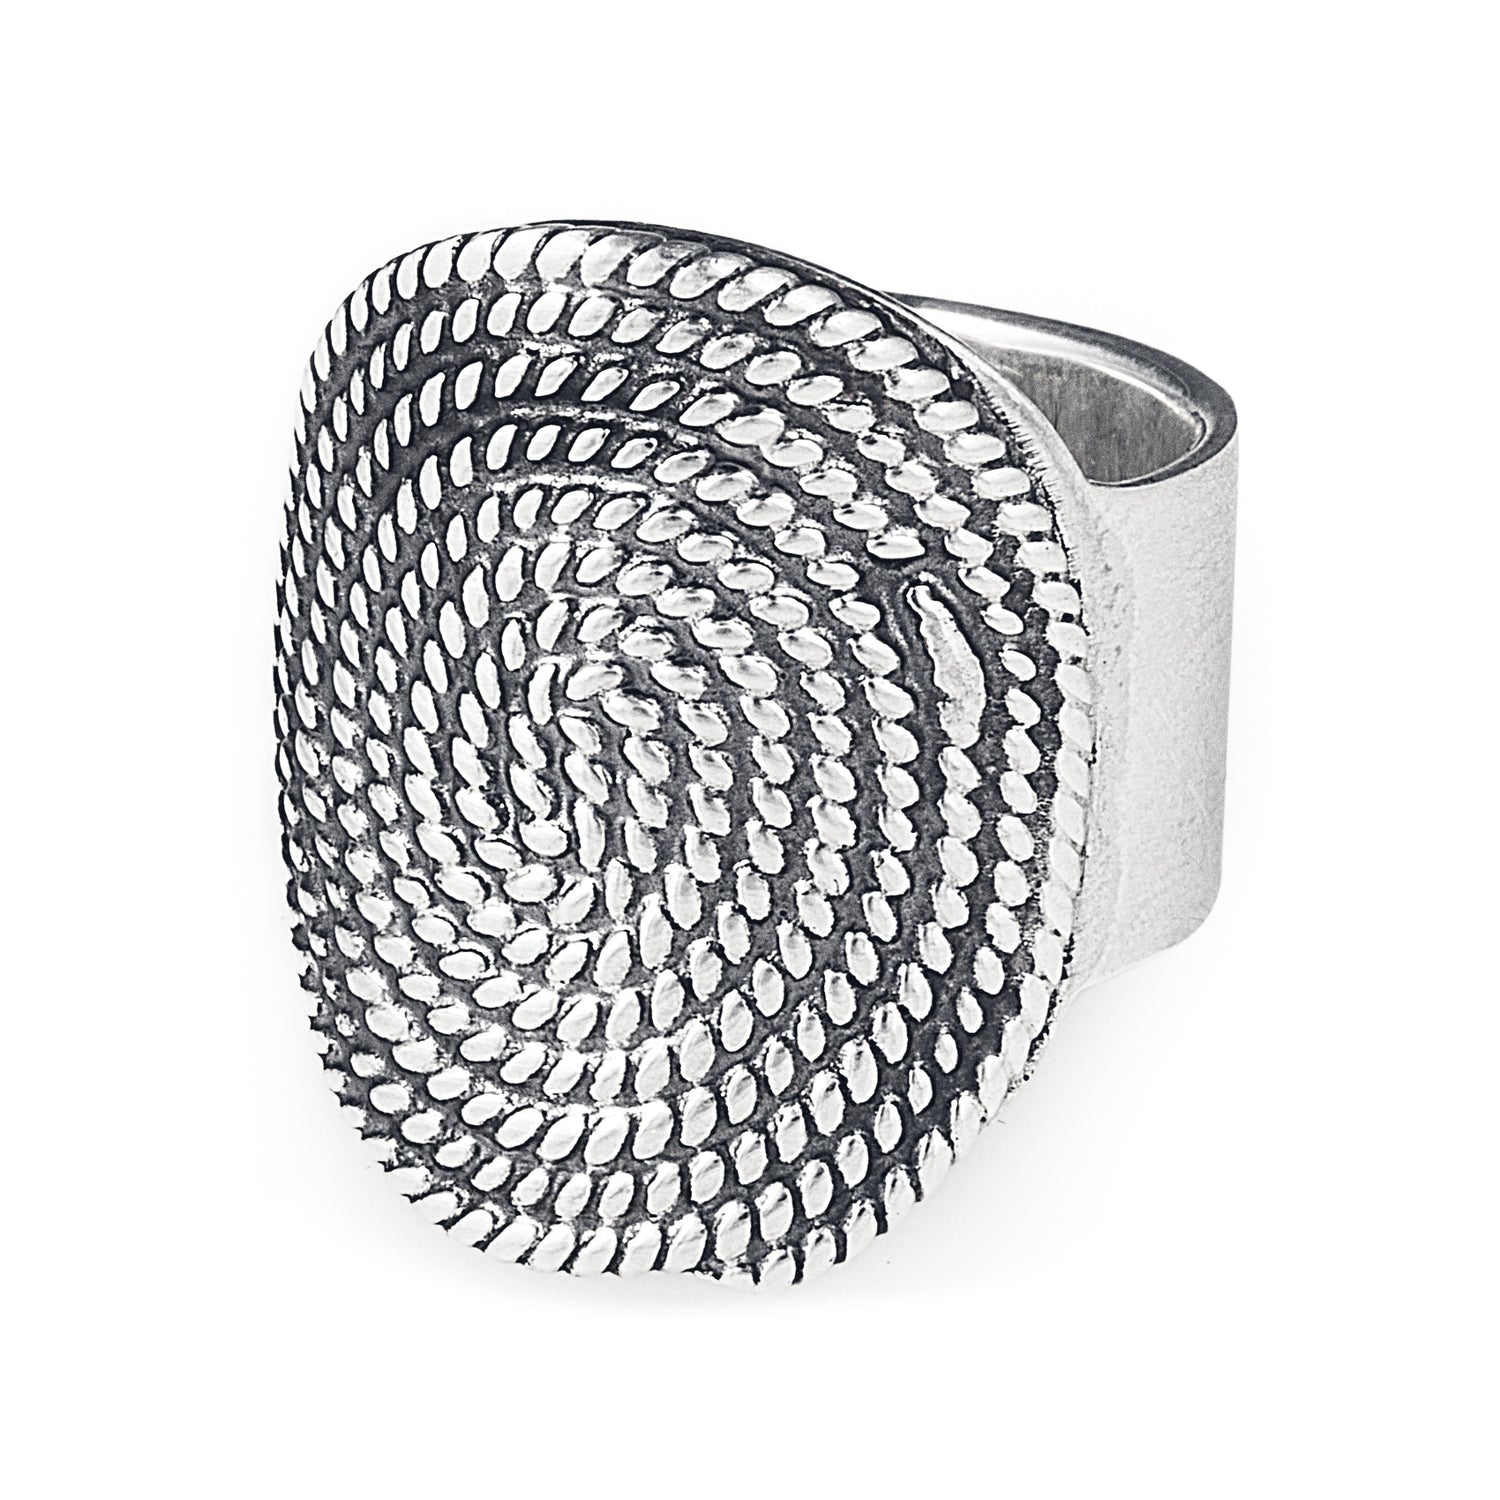 Tribal Mexican-inspired Mondo Swirl Ring in 925 Sterling Silver with Swirl Pattern Design. Worldwide Shipping.